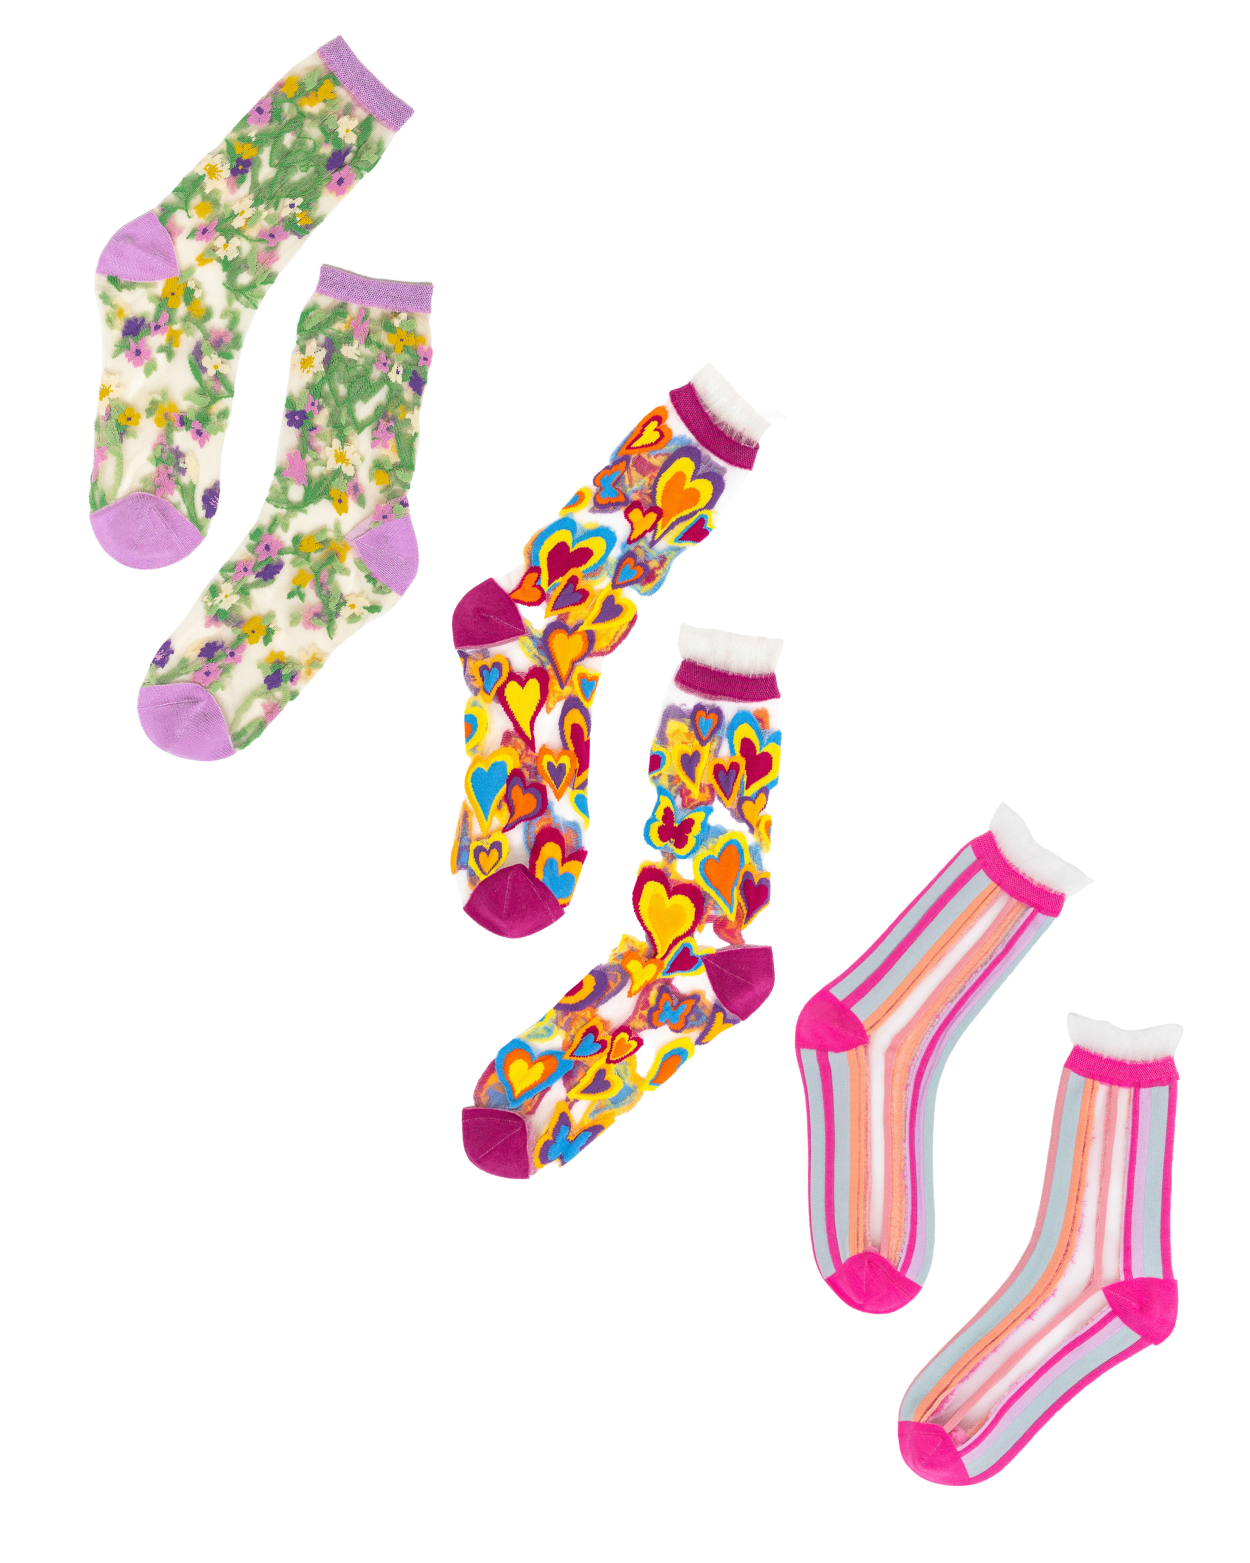 Girls Taylor Swift Socks the Must Have Gift for Swiftie Fans 